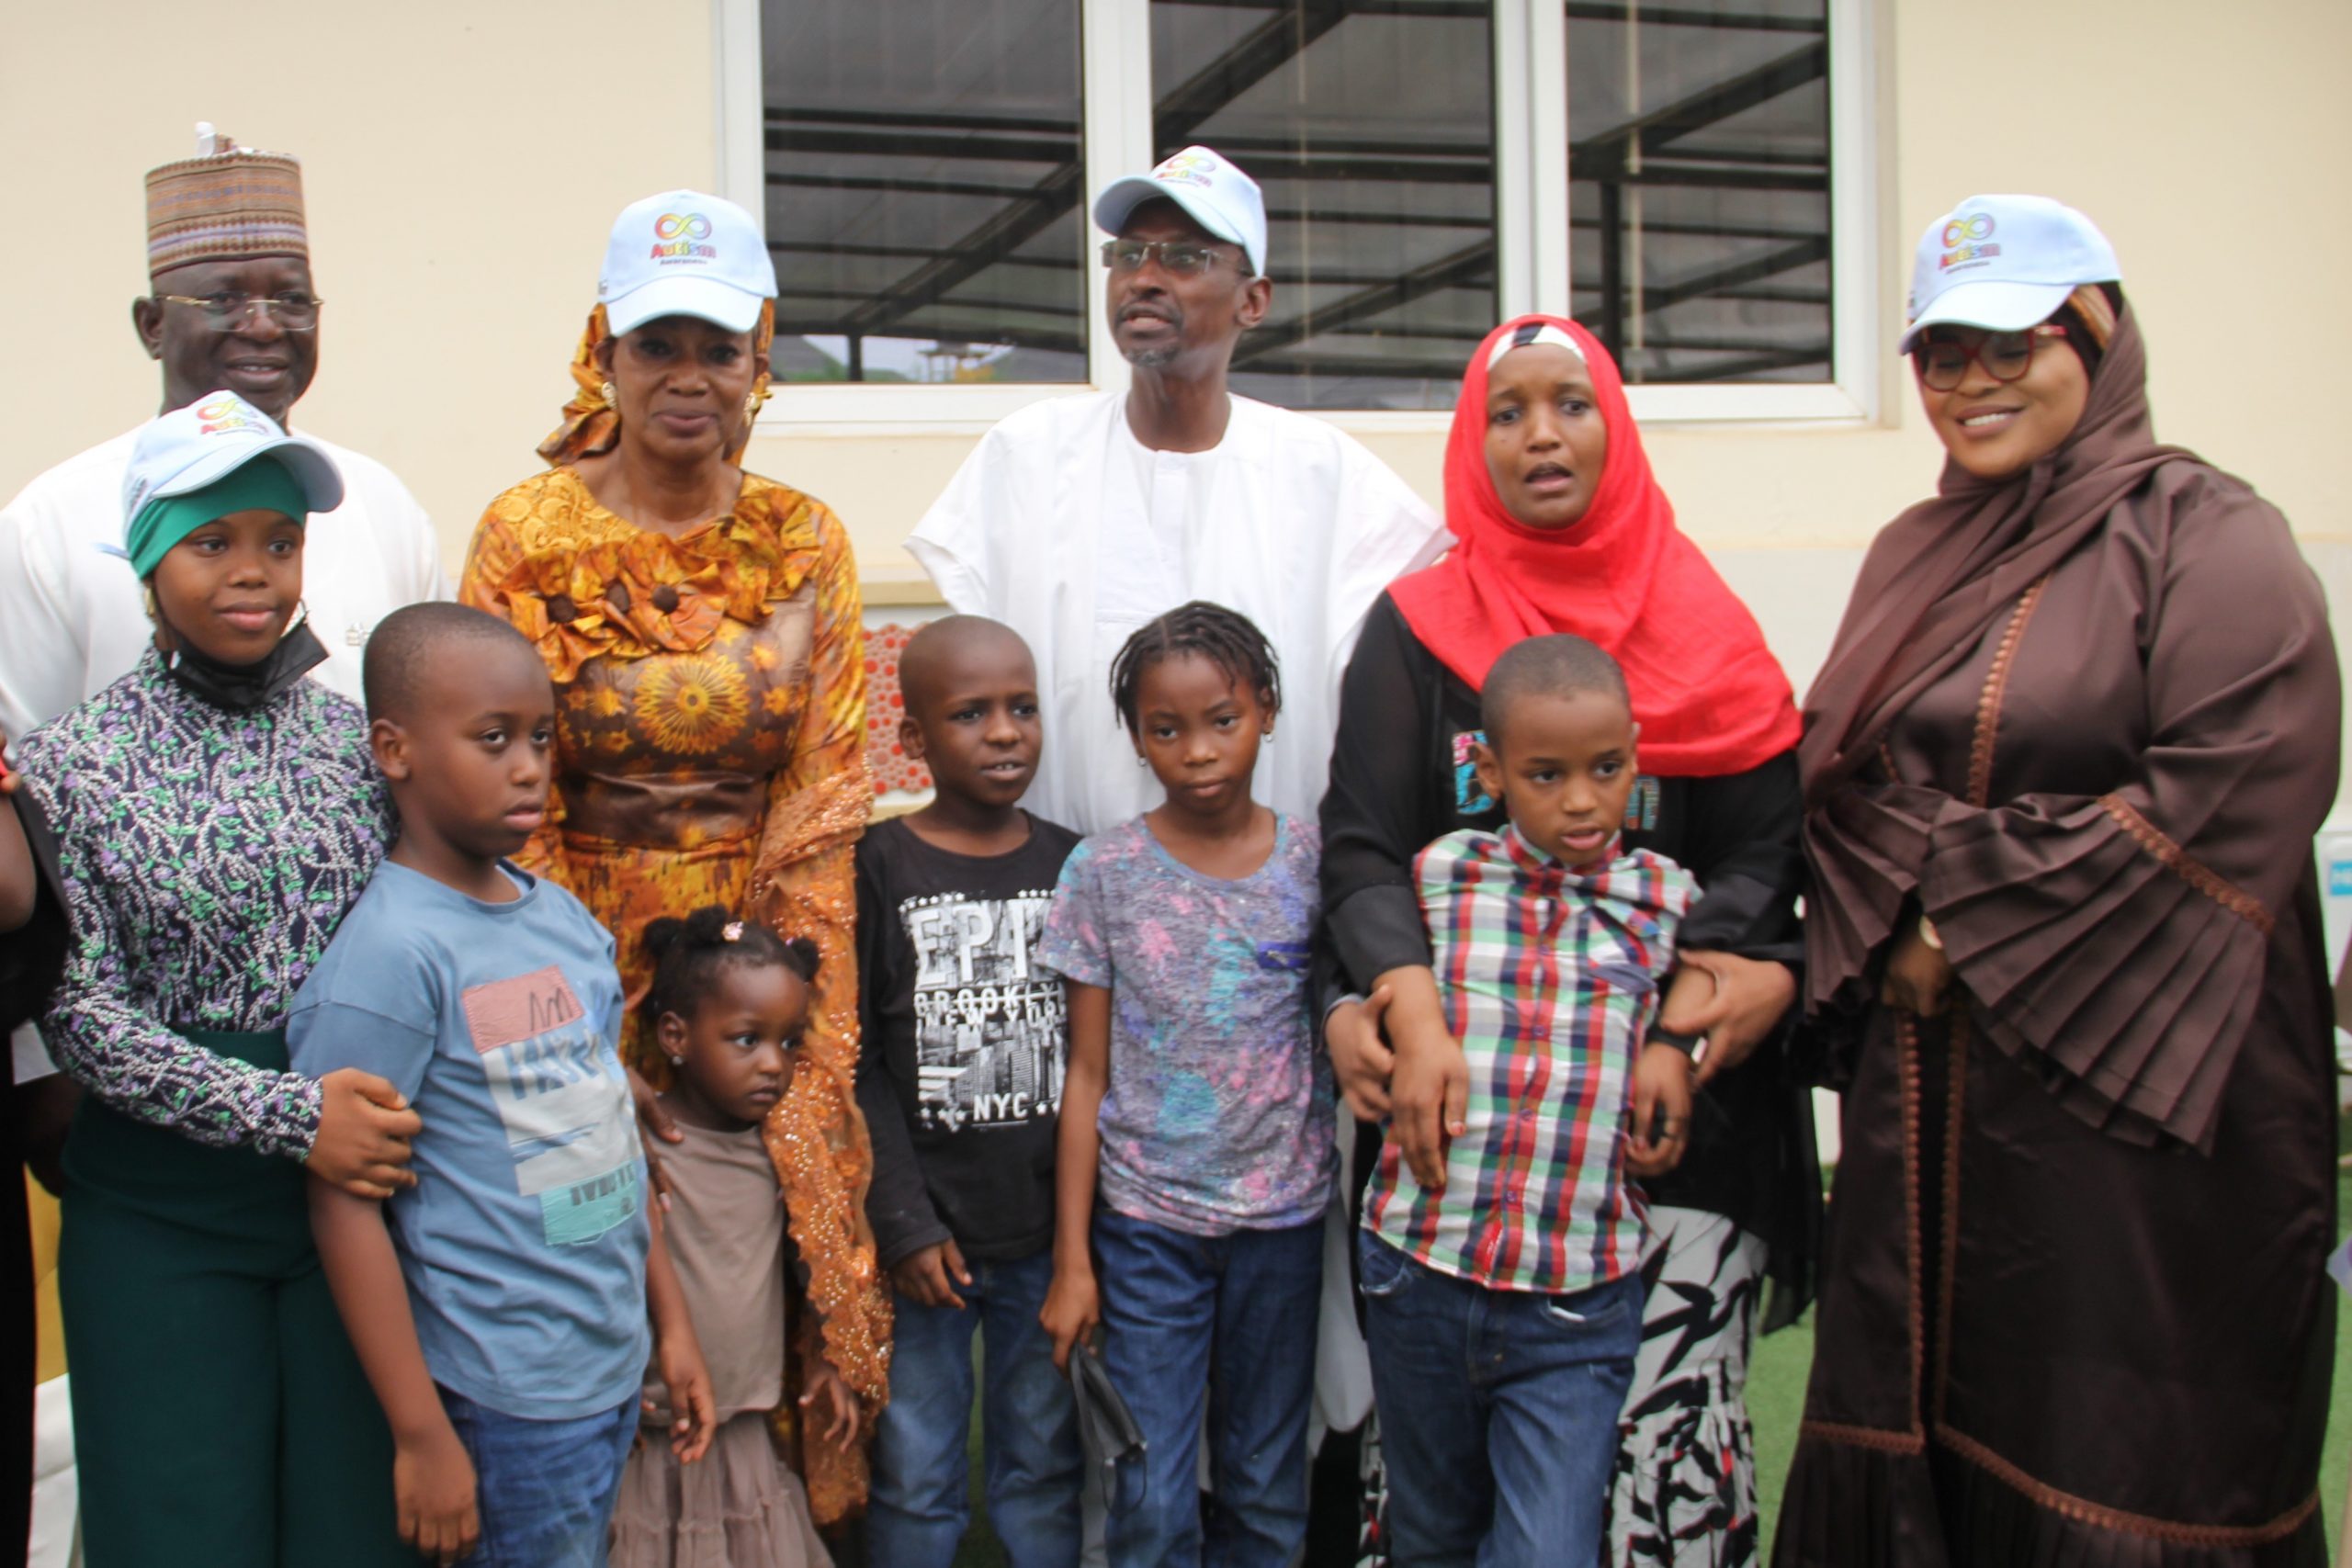  Secretary for Education Sani Dahir El-Katuzu, Special Assistant to FCT Minister on Community Relations, Dr Hailmary Aipoh, FCT Minister, Malam Muhammad Musa Bello, MD Brain Bloom Special Needs  Center Mrs Rahanatu Yusuf, Special Assistant to Minister on Community Relations, Barr. Zainab Marwa Abubakar with pupils of the Brain Bloom Center during the Minister's visit as part of Autism Awareness month in Abuja